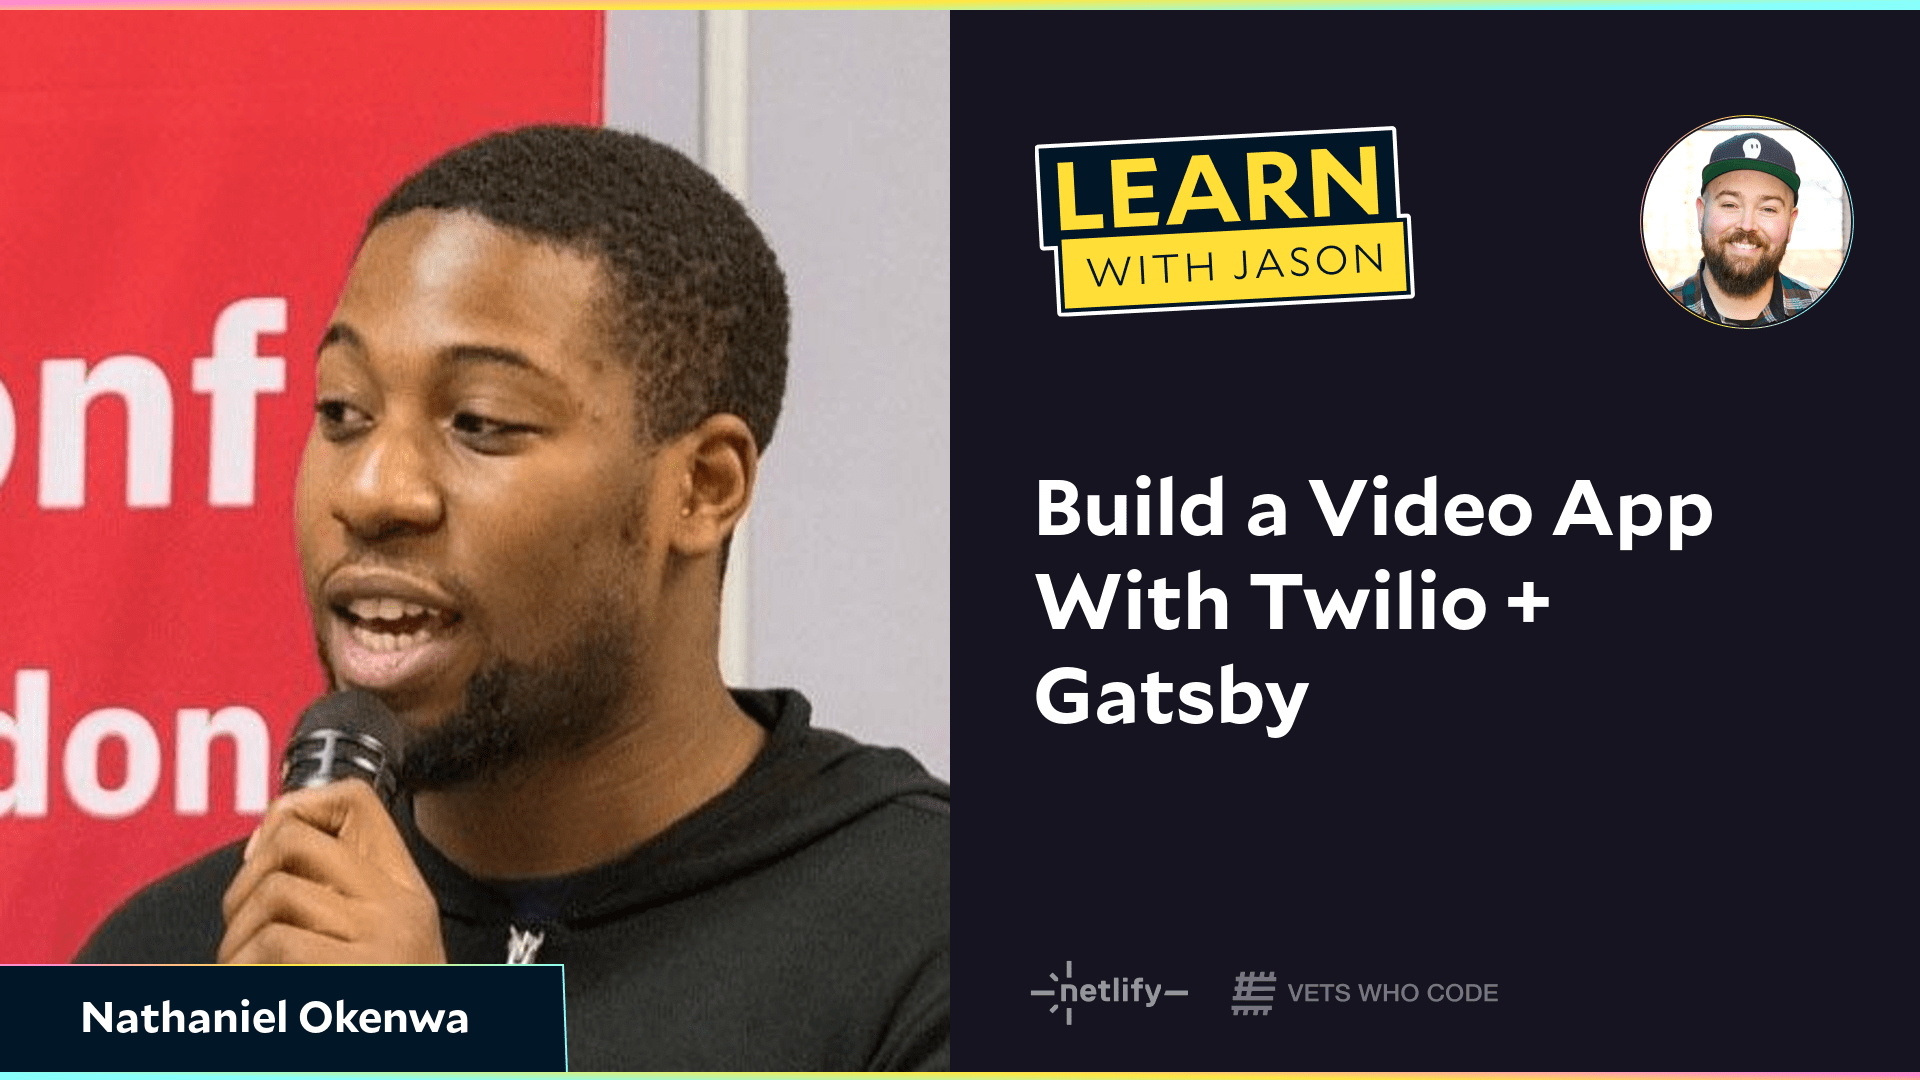 Build a Video App With Twilio + Gatsby (with Nathaniel Okenwa)